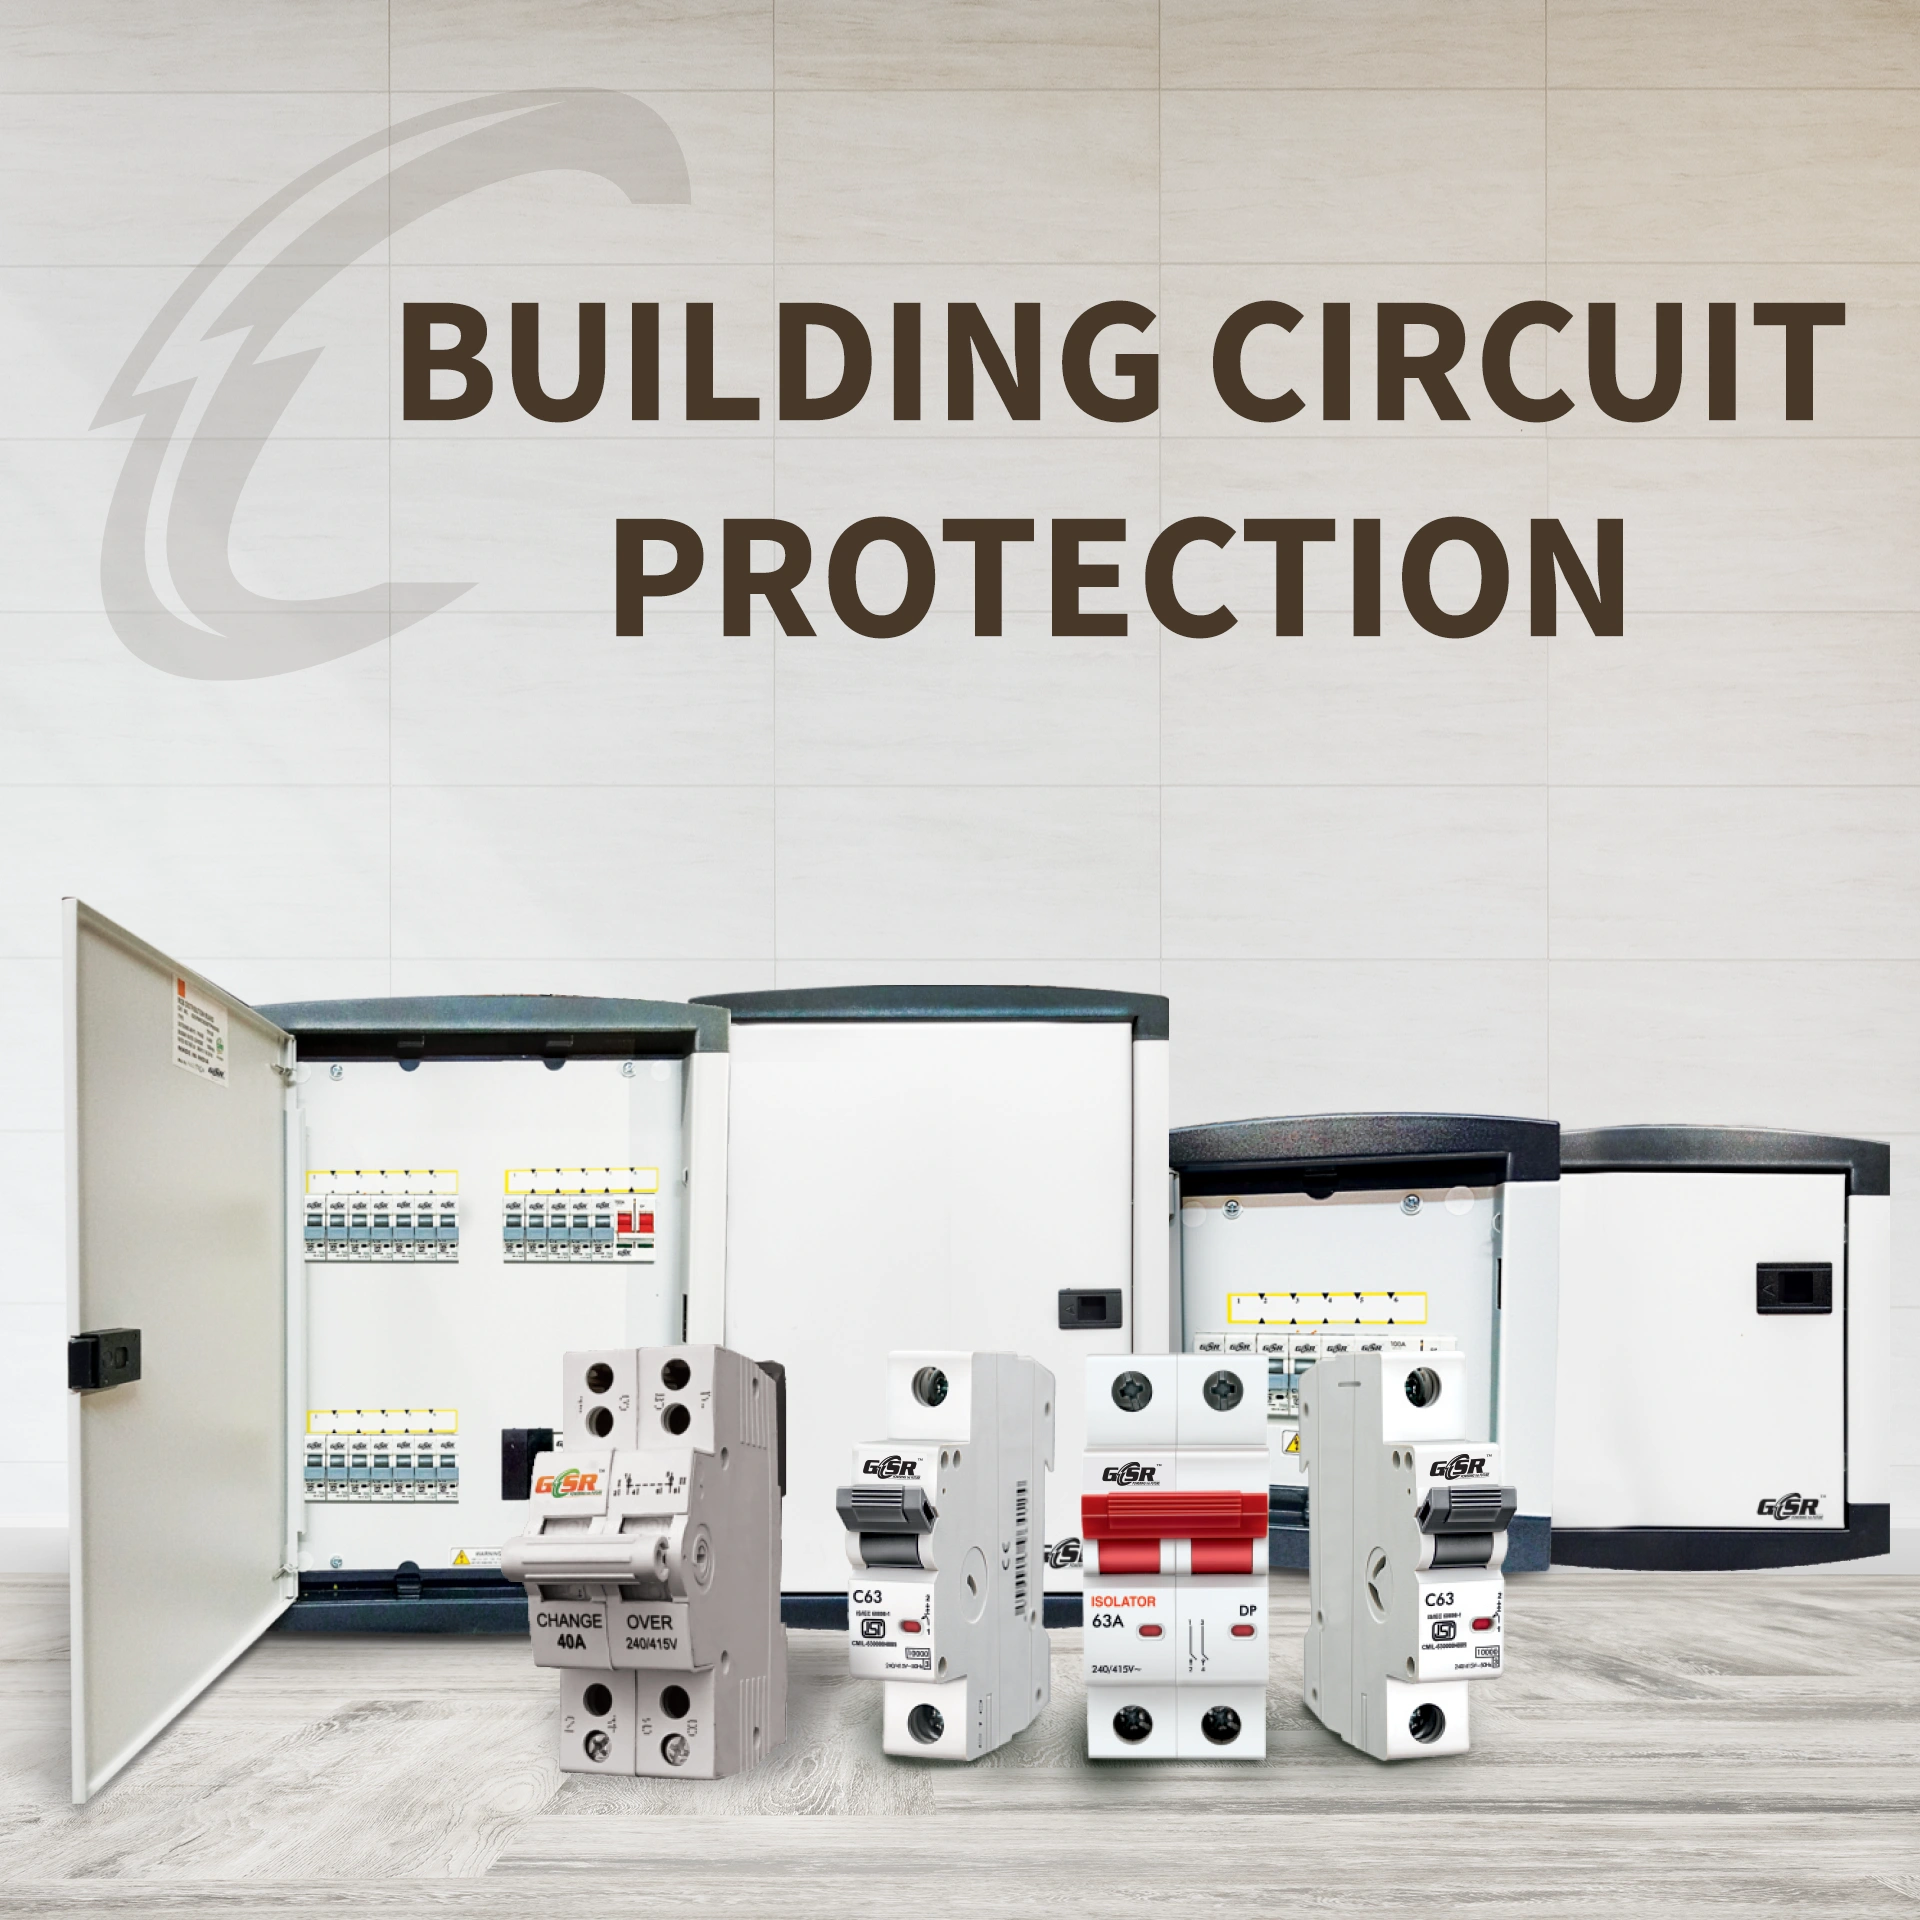 GSR Building Circuit Protection